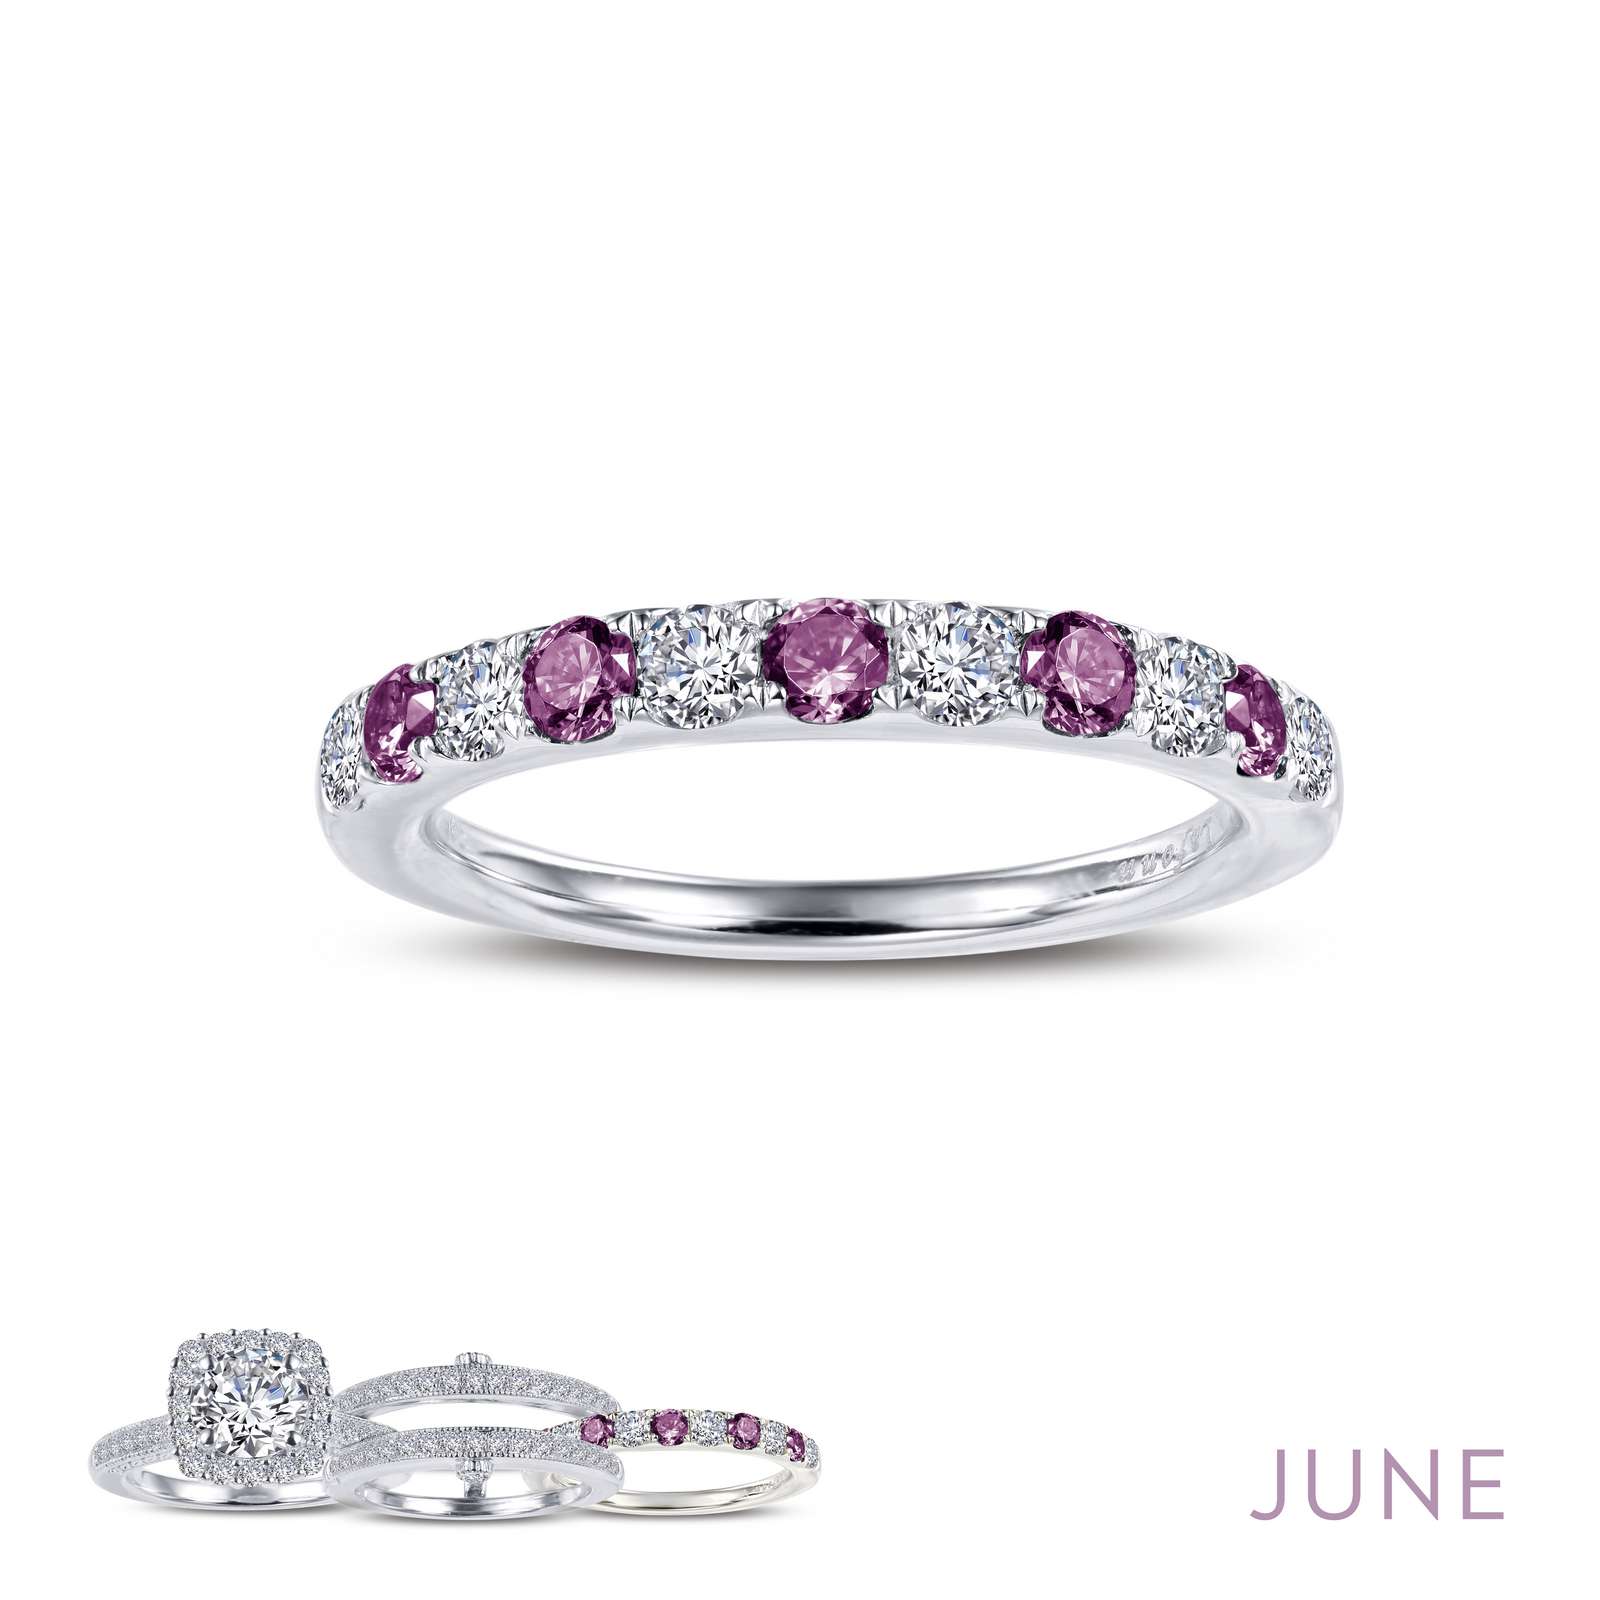 June Birthstone Ring Griner Jewelry Co. Moultrie, GA